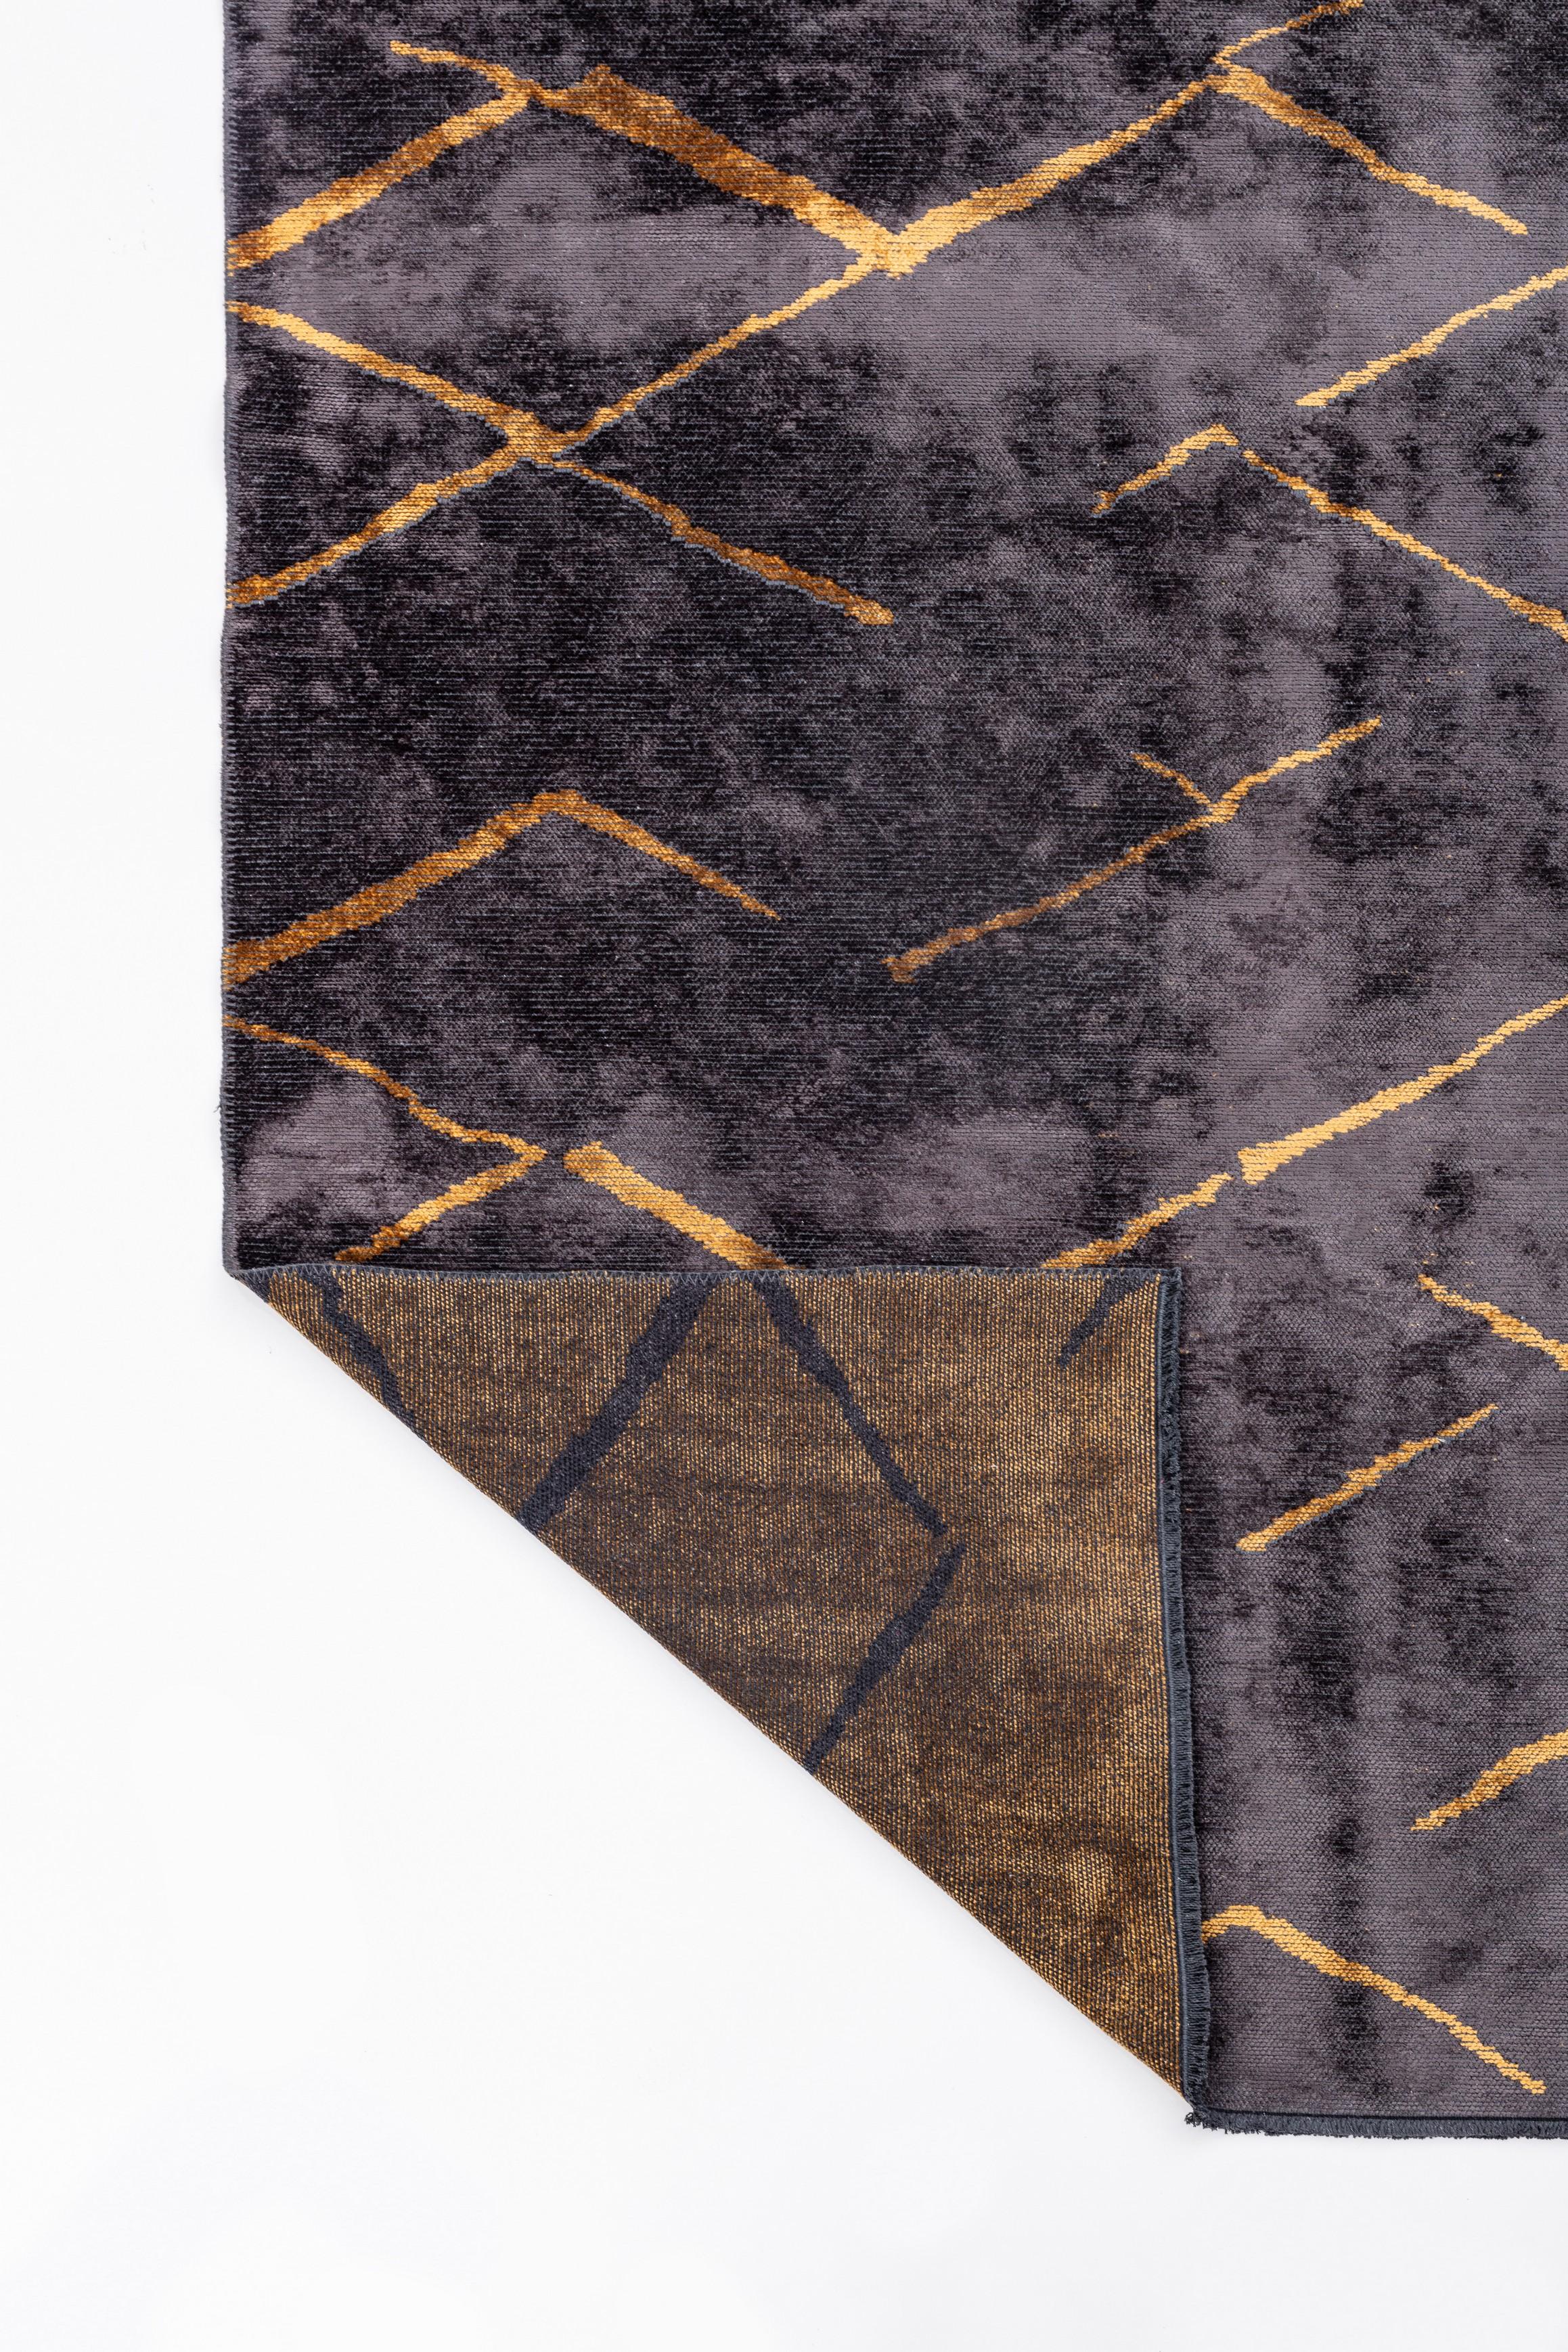 For Sale:  (Black) Modern  Abstract Luxury Area Rug 3